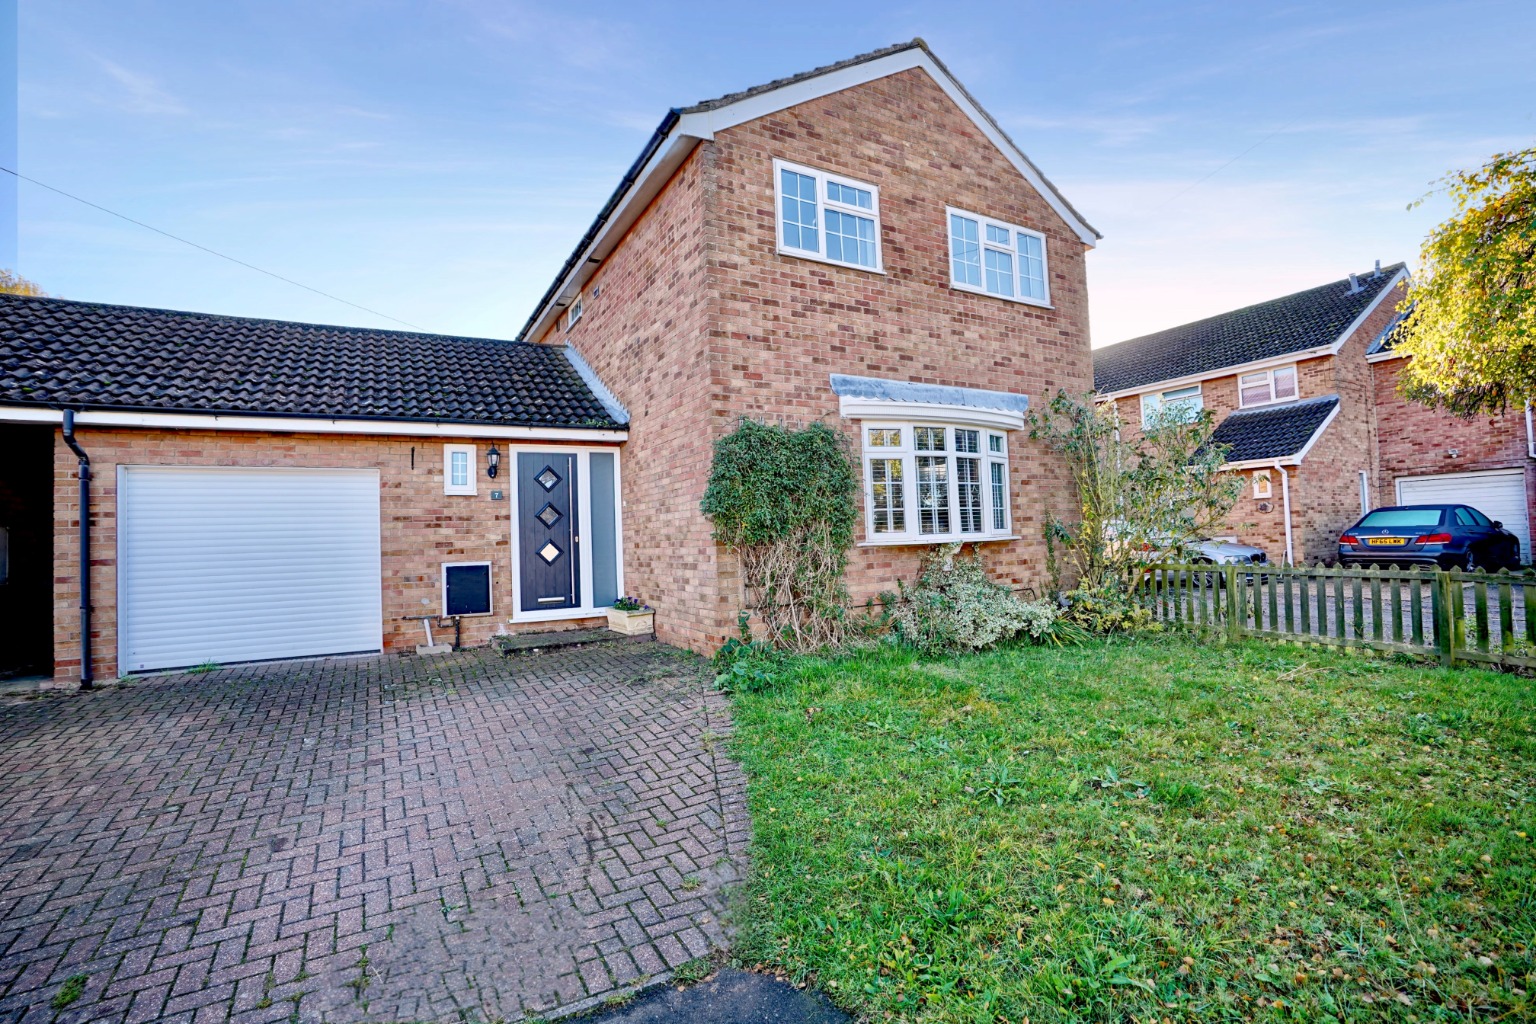 3 bed link detached house for sale in Wyboston Court, St Neots - Property Image 1